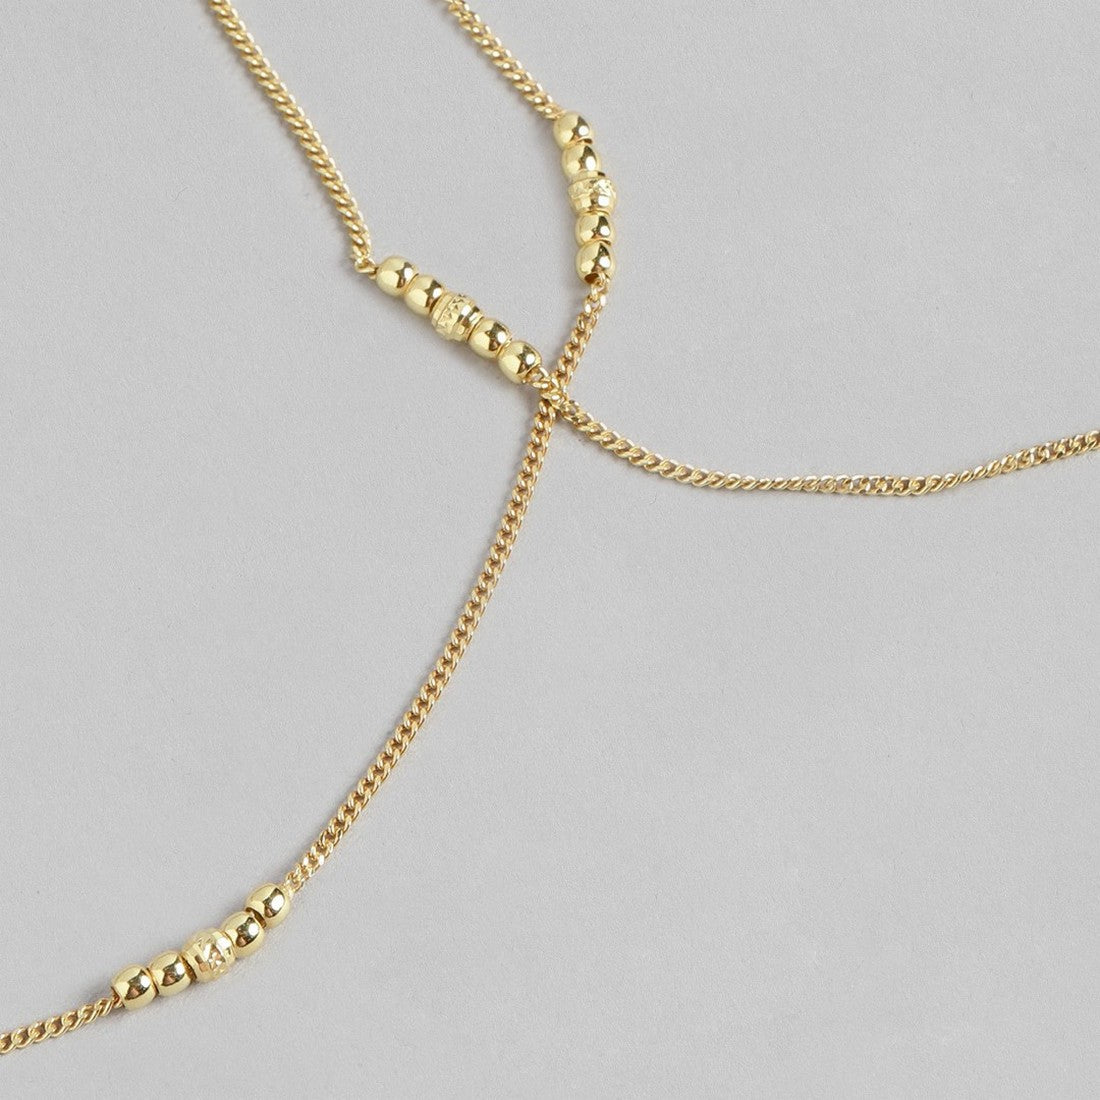 Beaded Gold-Plated 925 Sterling Silver Chained Anklet